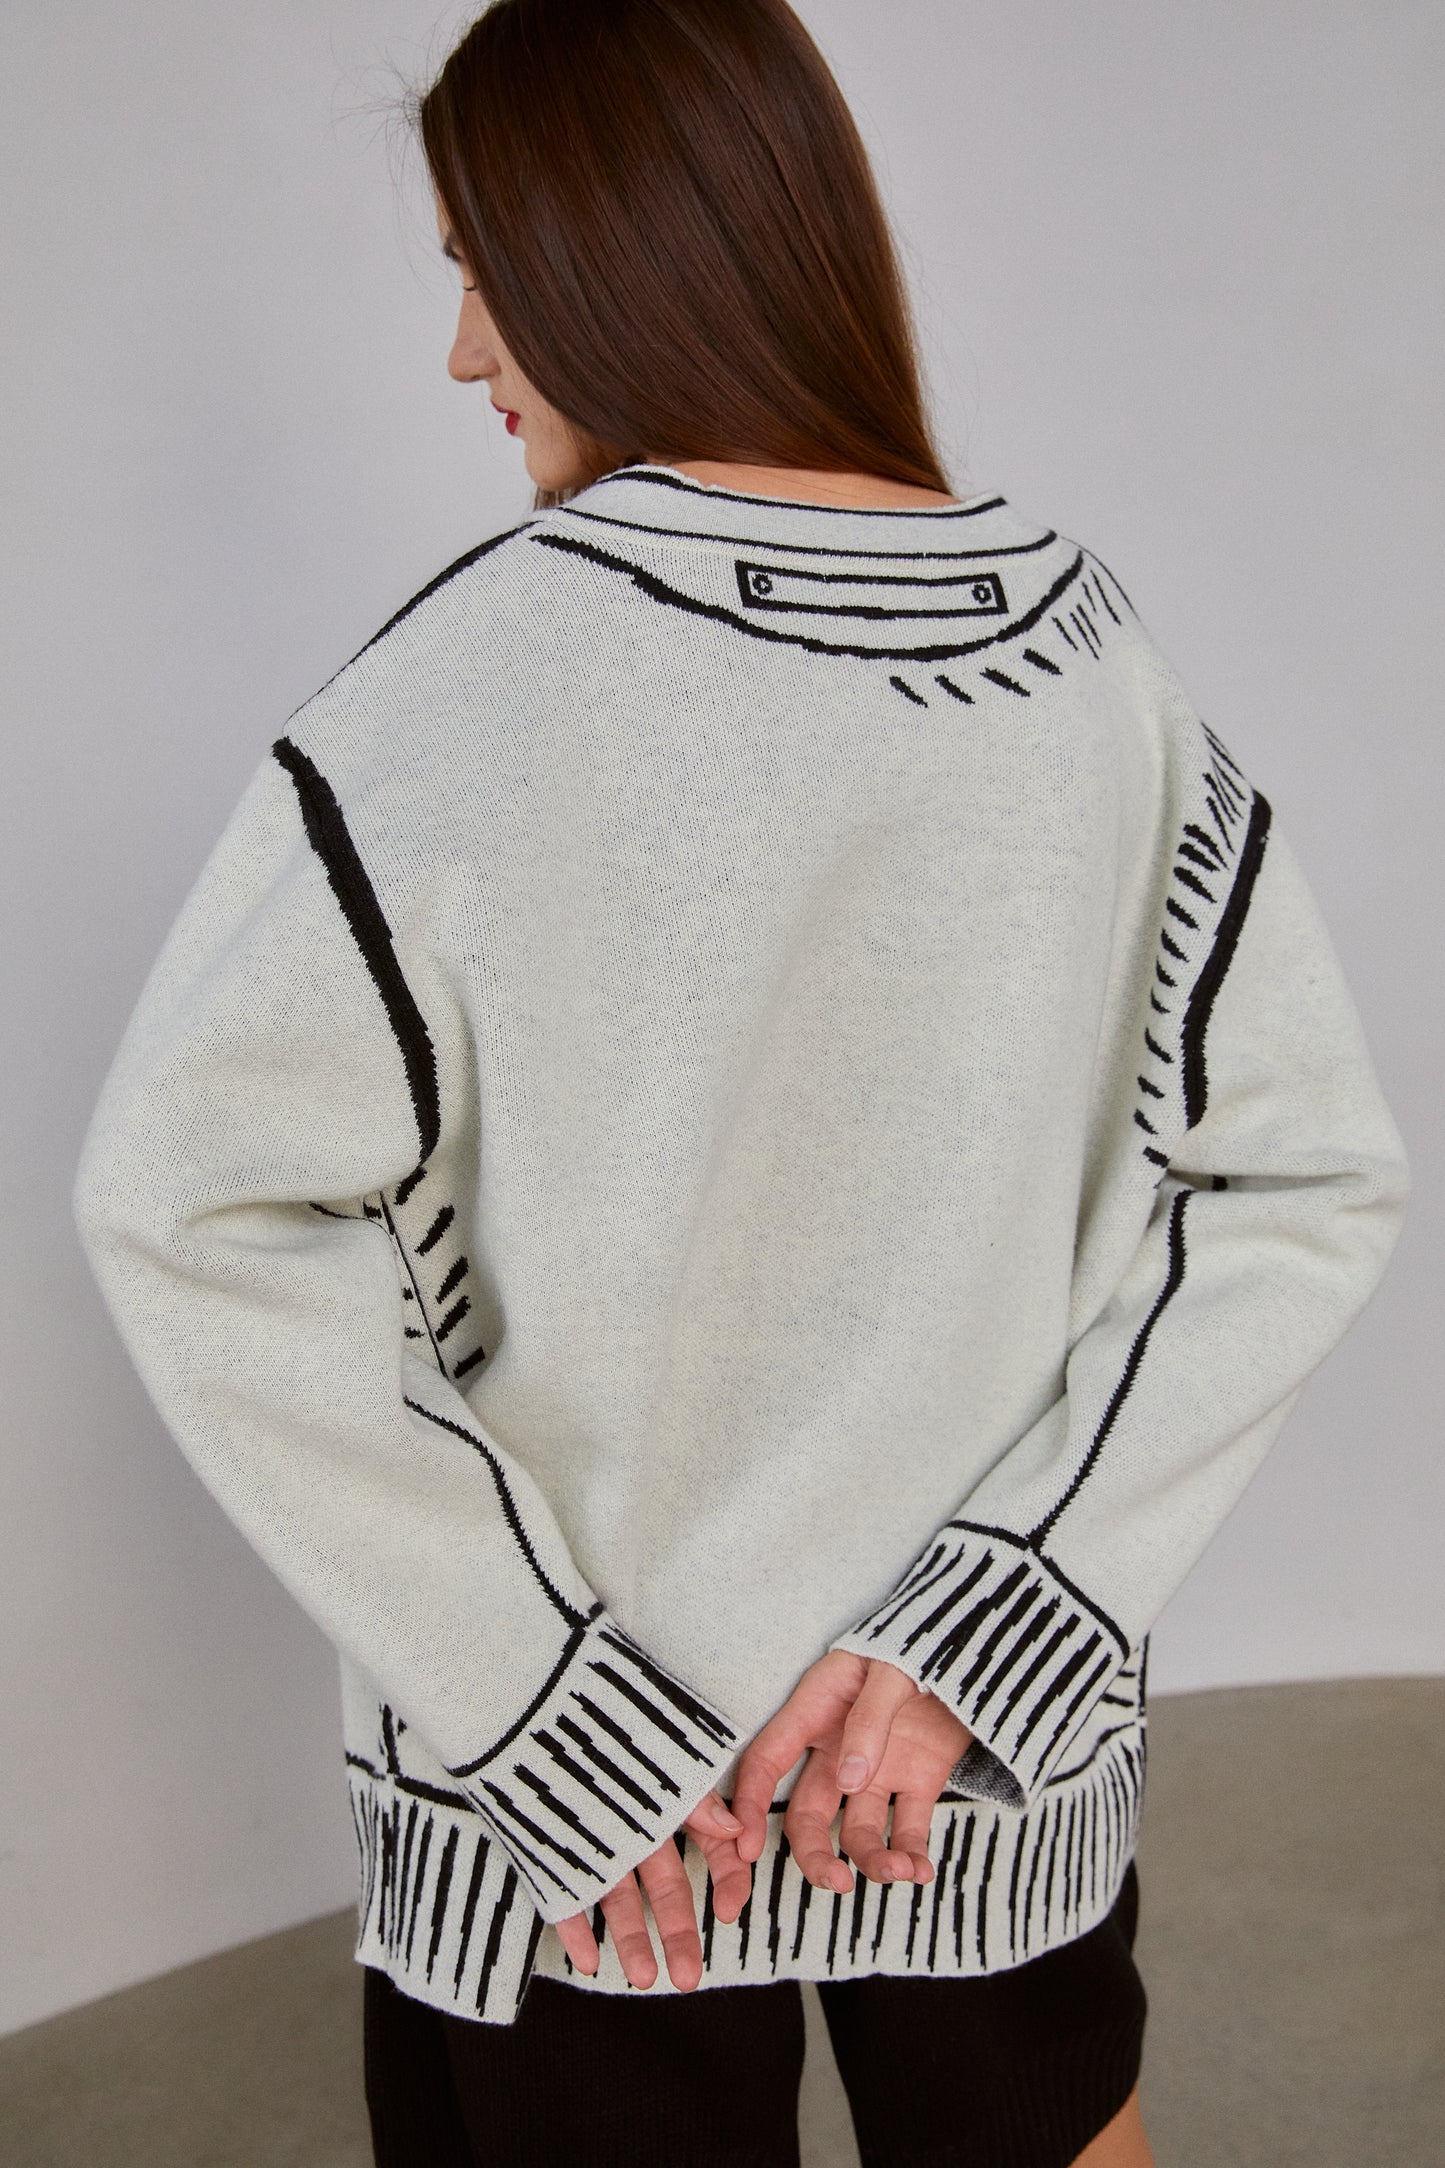 Sewn Doodle Graphic Knit Cardigan, White